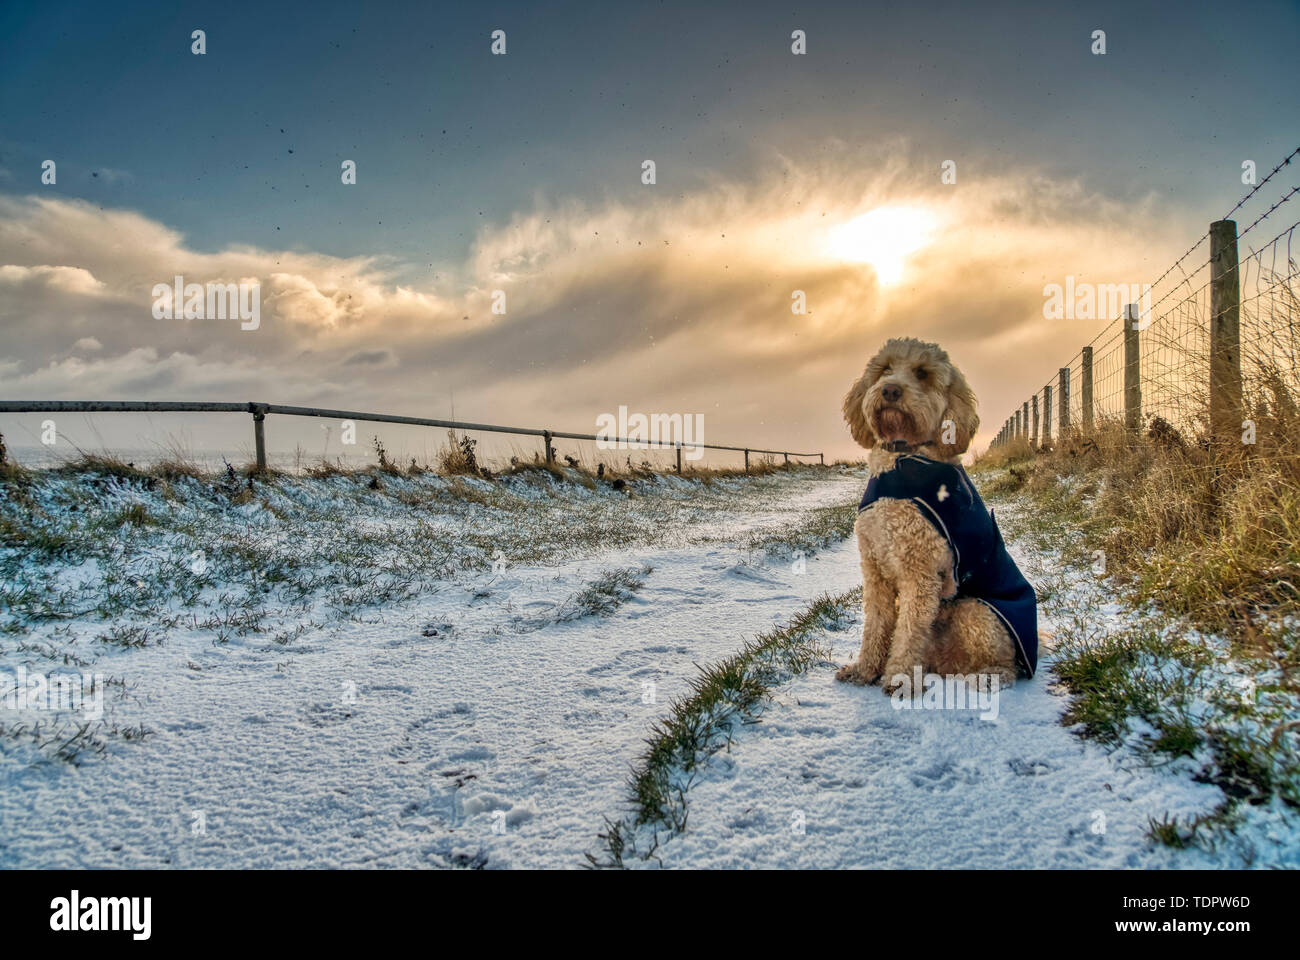 Dog wearing coat and sitting on a snowy path; South Shields, Tyne and Wear, England Stock Photo